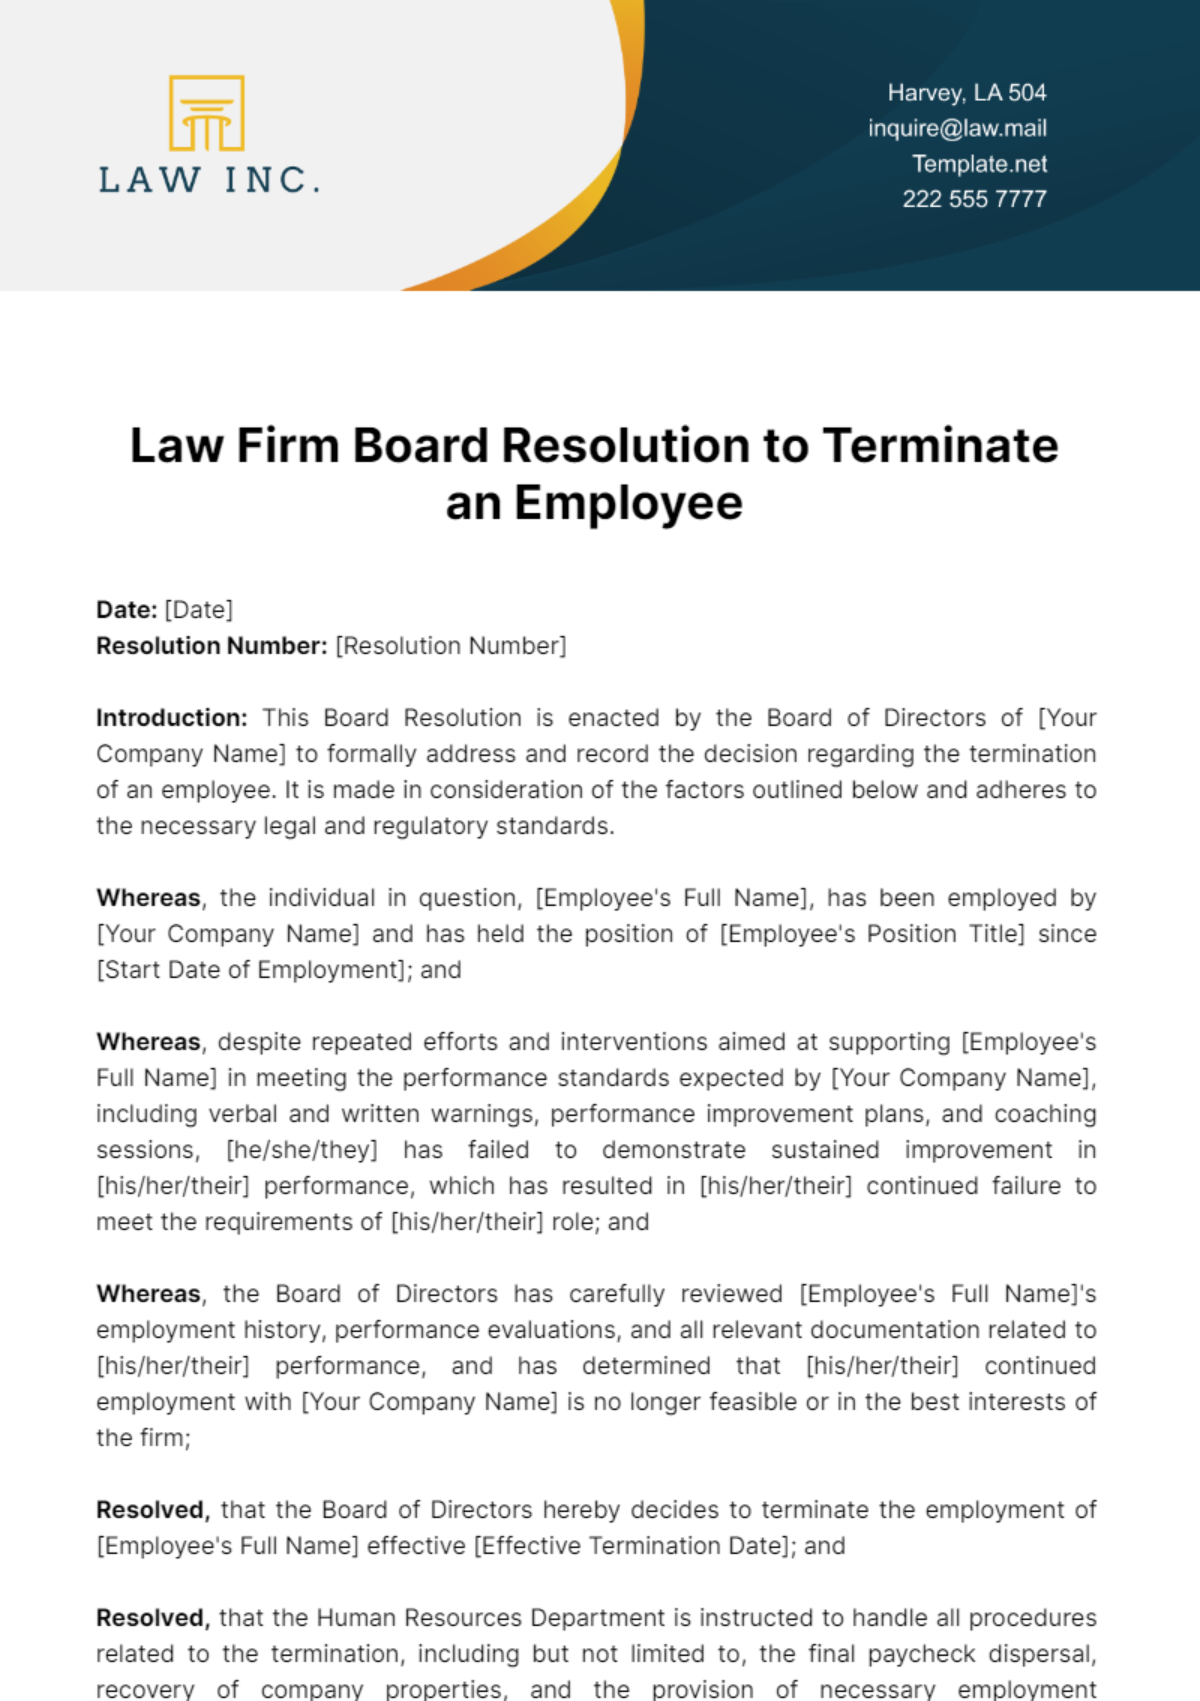 Free Law Firm Board Resolution to Terminate an Employee Template